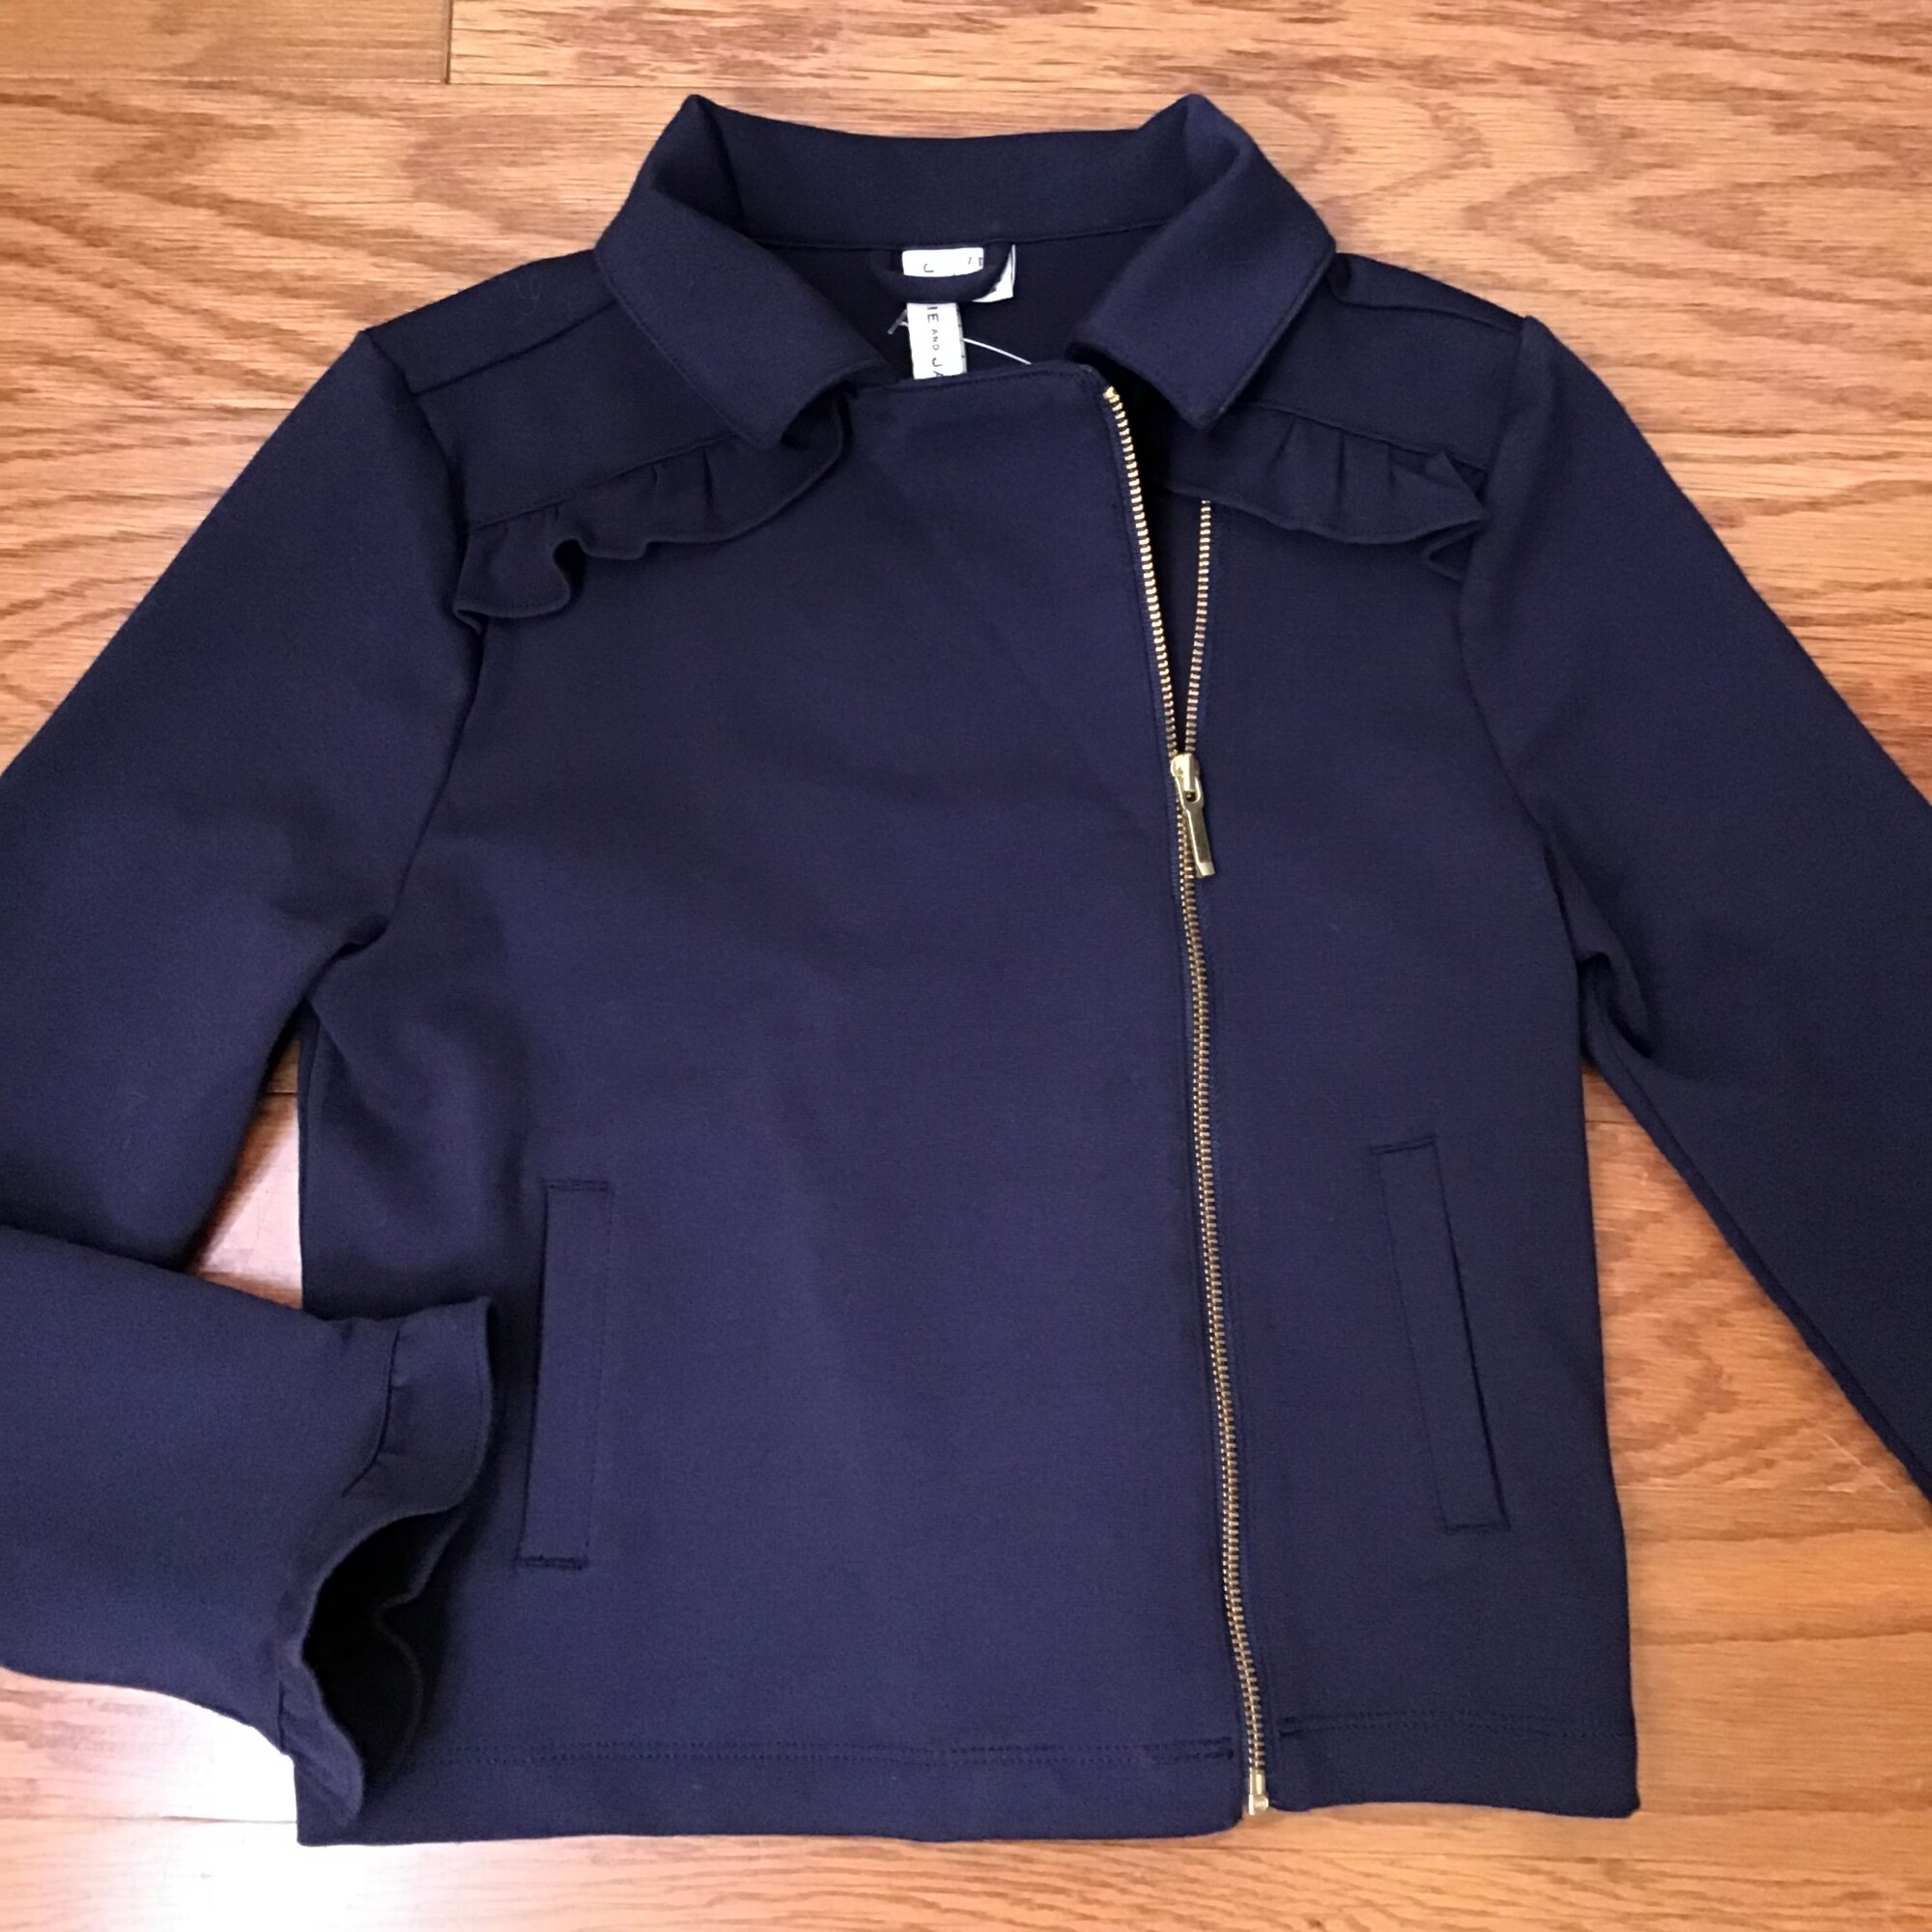 Janie Jack Jacket, Navy, Size: 7-8

ALL ONLINE SALES ARE FINAL.
NO RETURNS
REFUNDS
OR EXCHANGES

PLEASE ALLOW AT LEAST 1 WEEK FOR SHIPMENT. THANK YOU FOR SHOPPING SMALL!